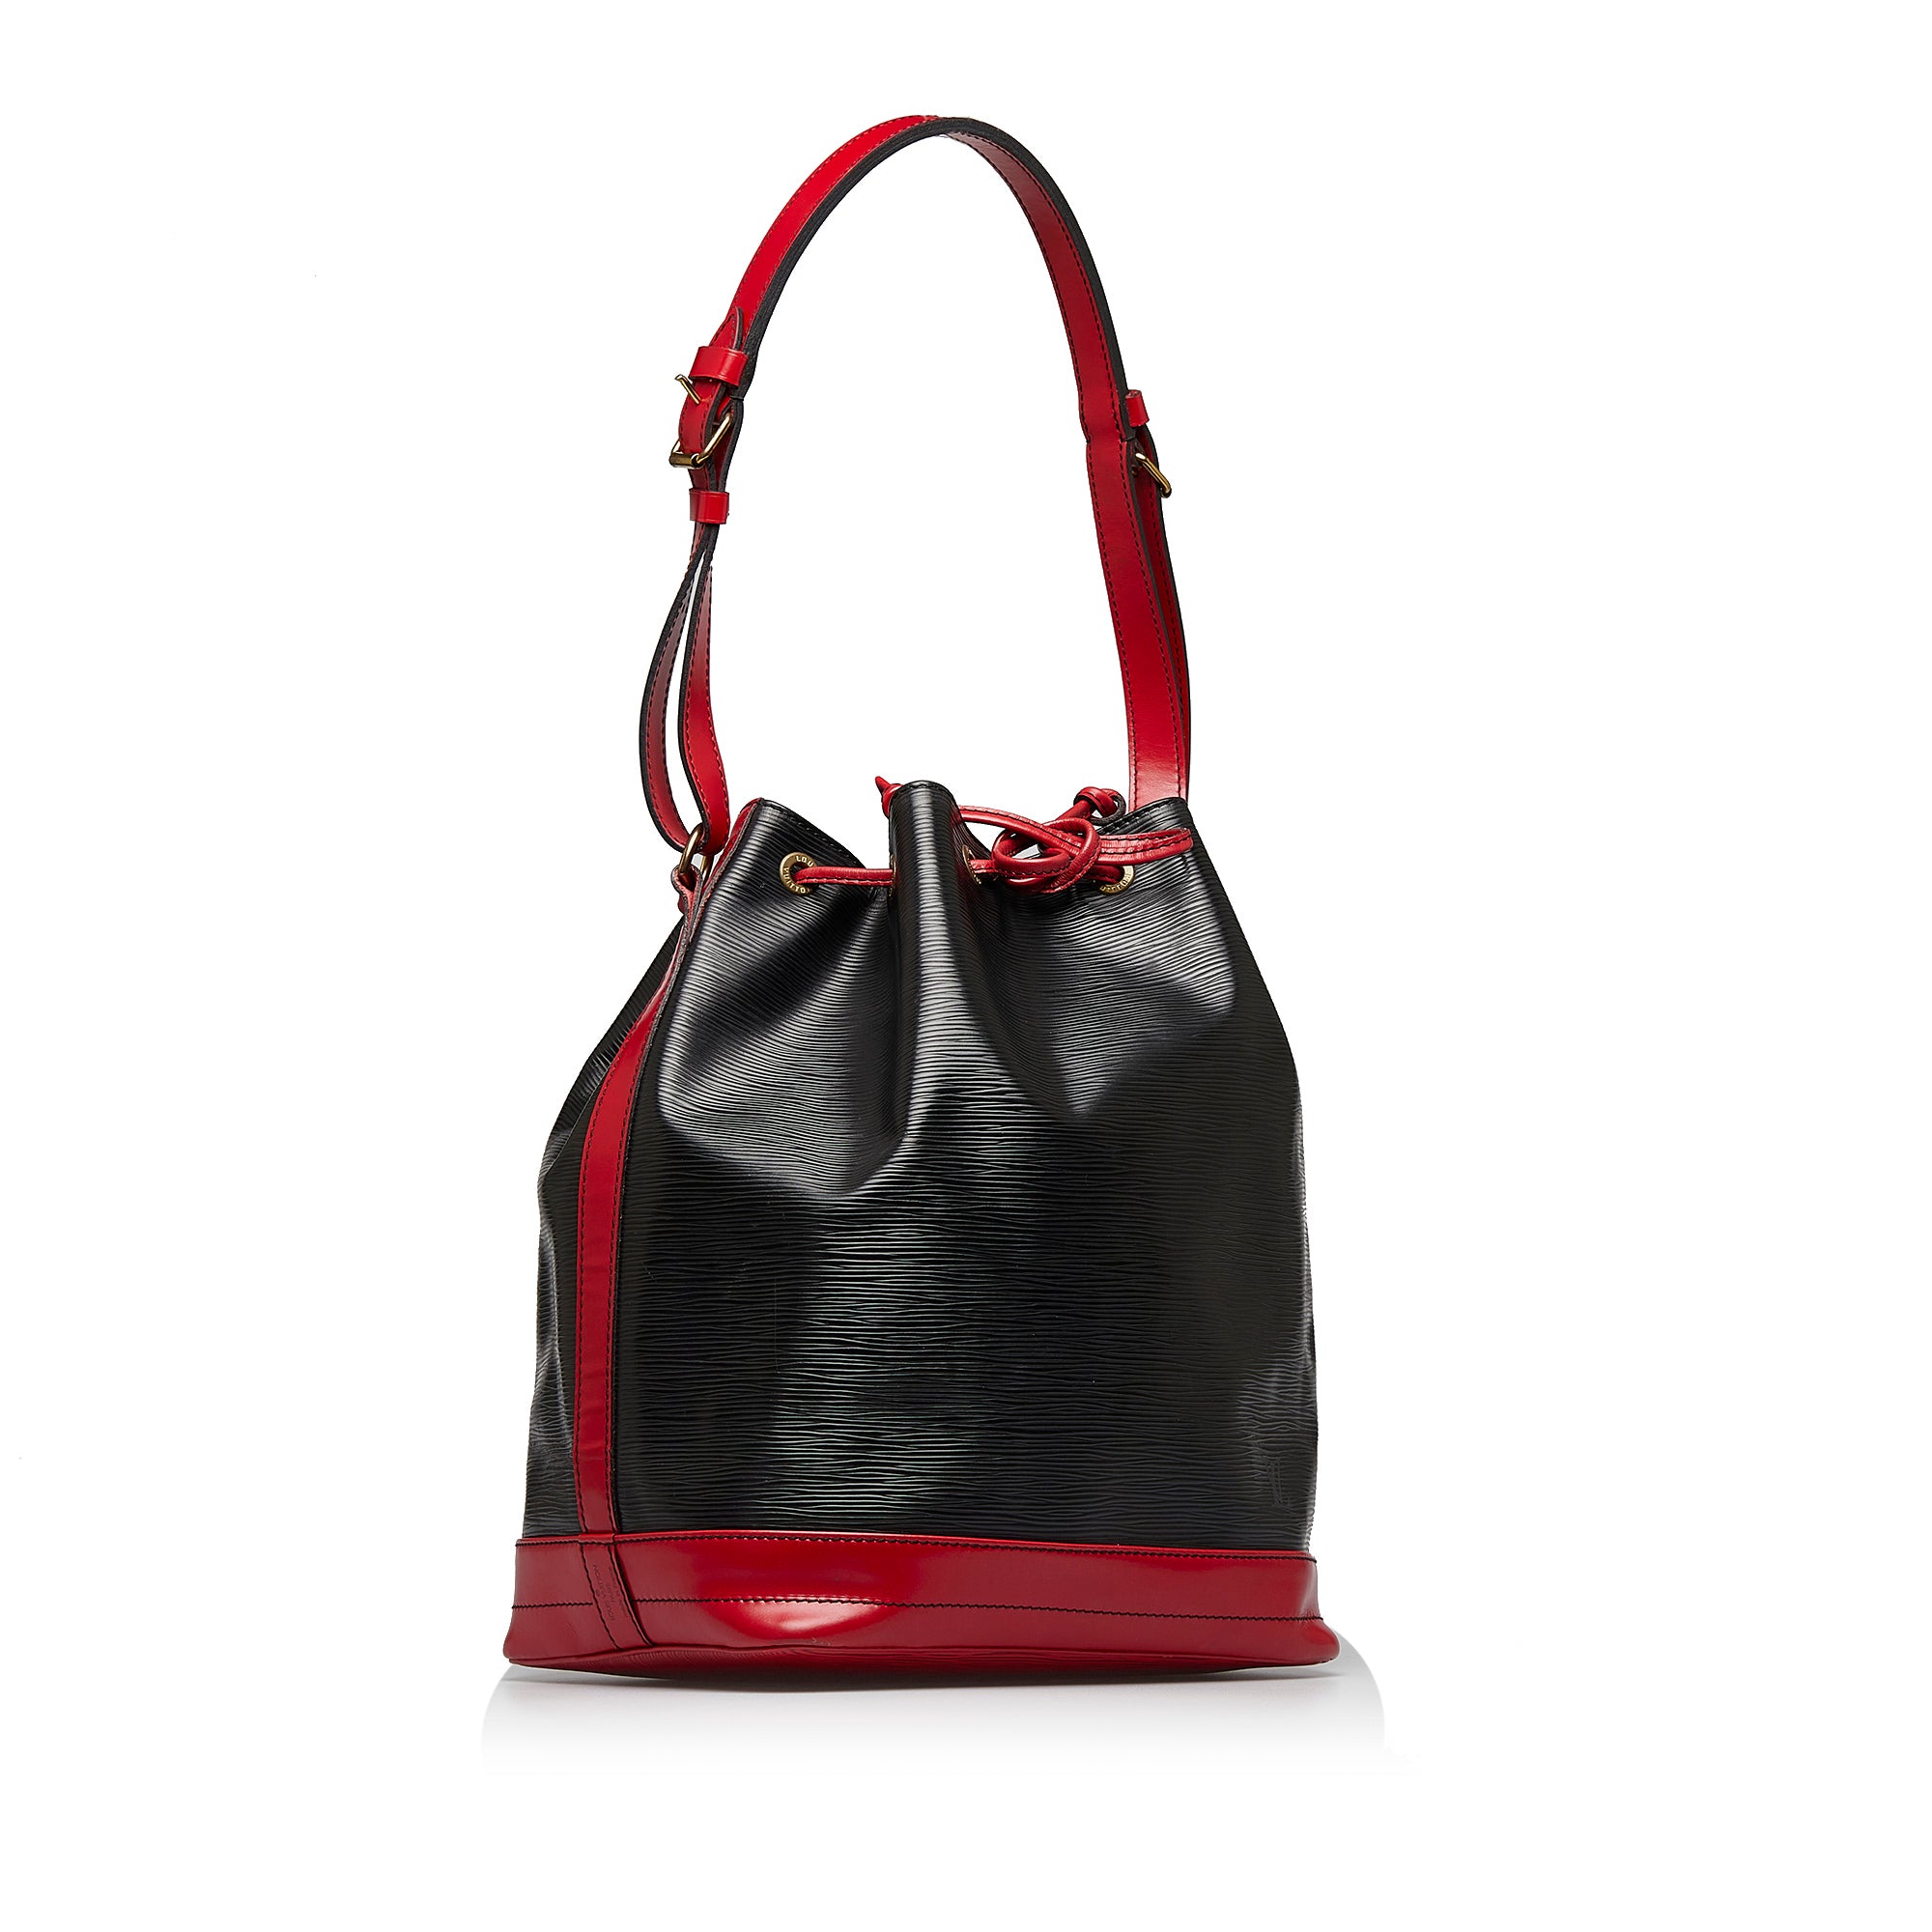 Louis Vuitton Noe Bicolor Black Stitching Pm in Red